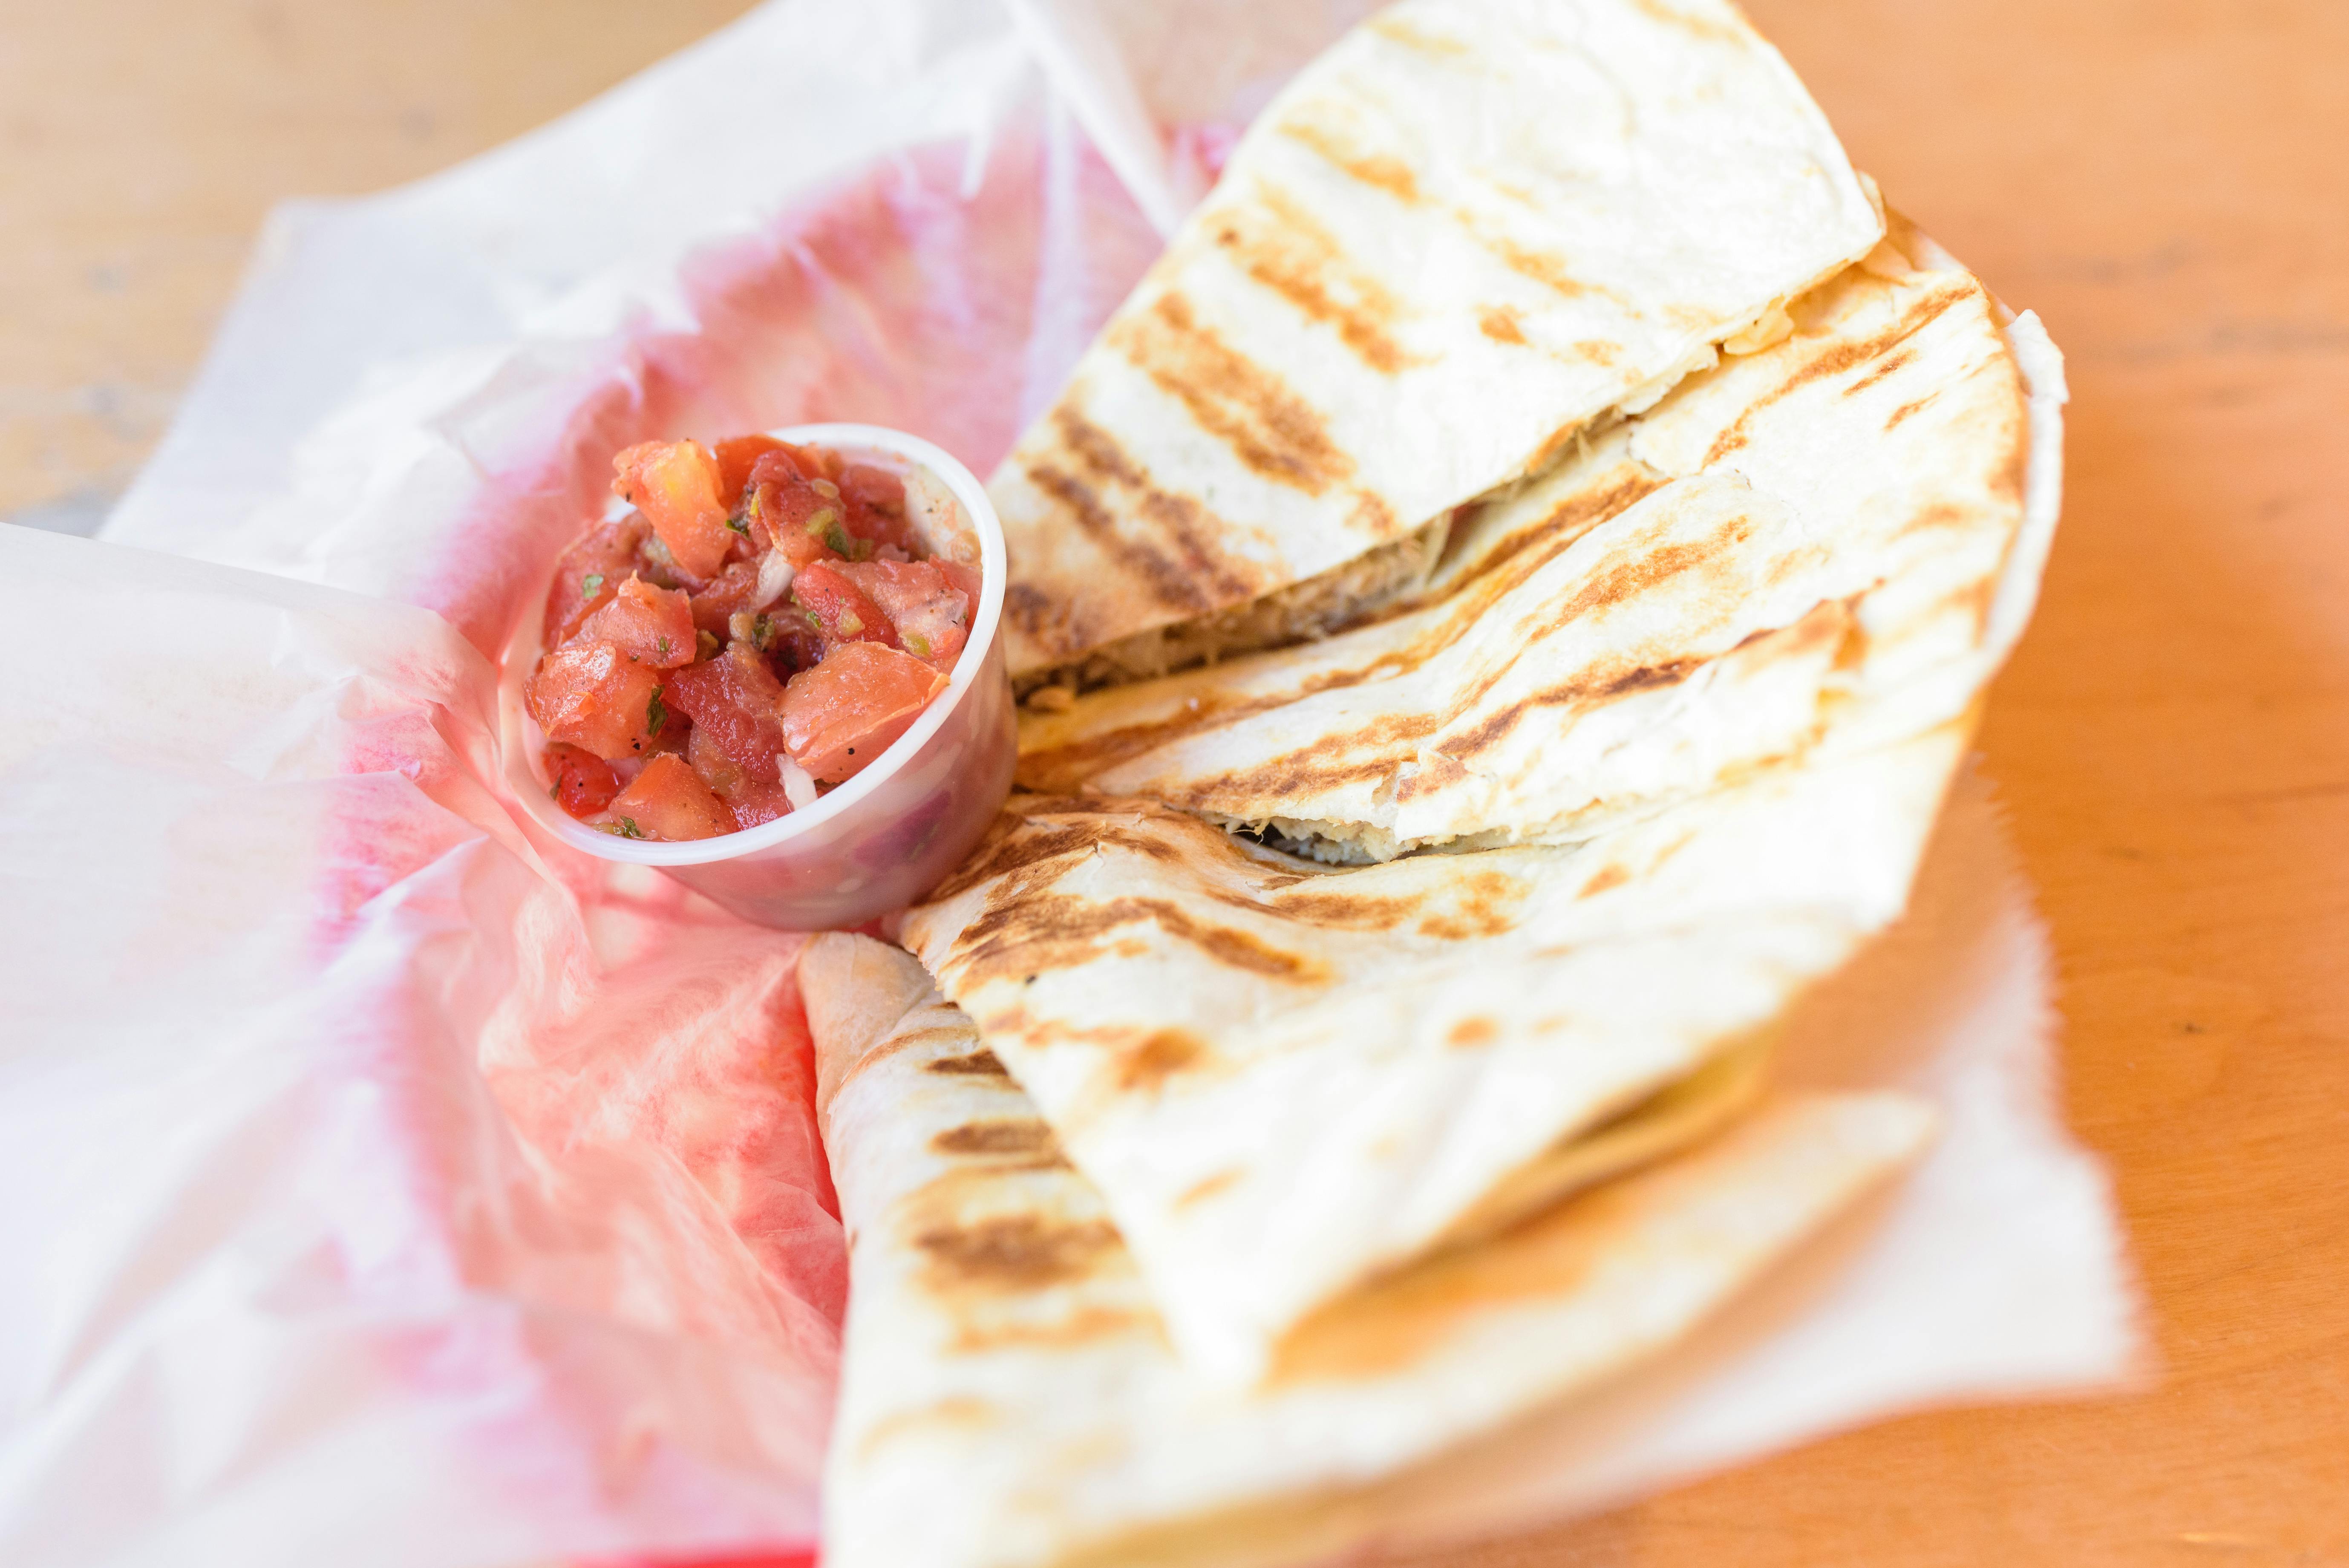 Ground Beef Quesadilla from BTB Burrito/ Good Time Charley's in Ann Arbor, MI